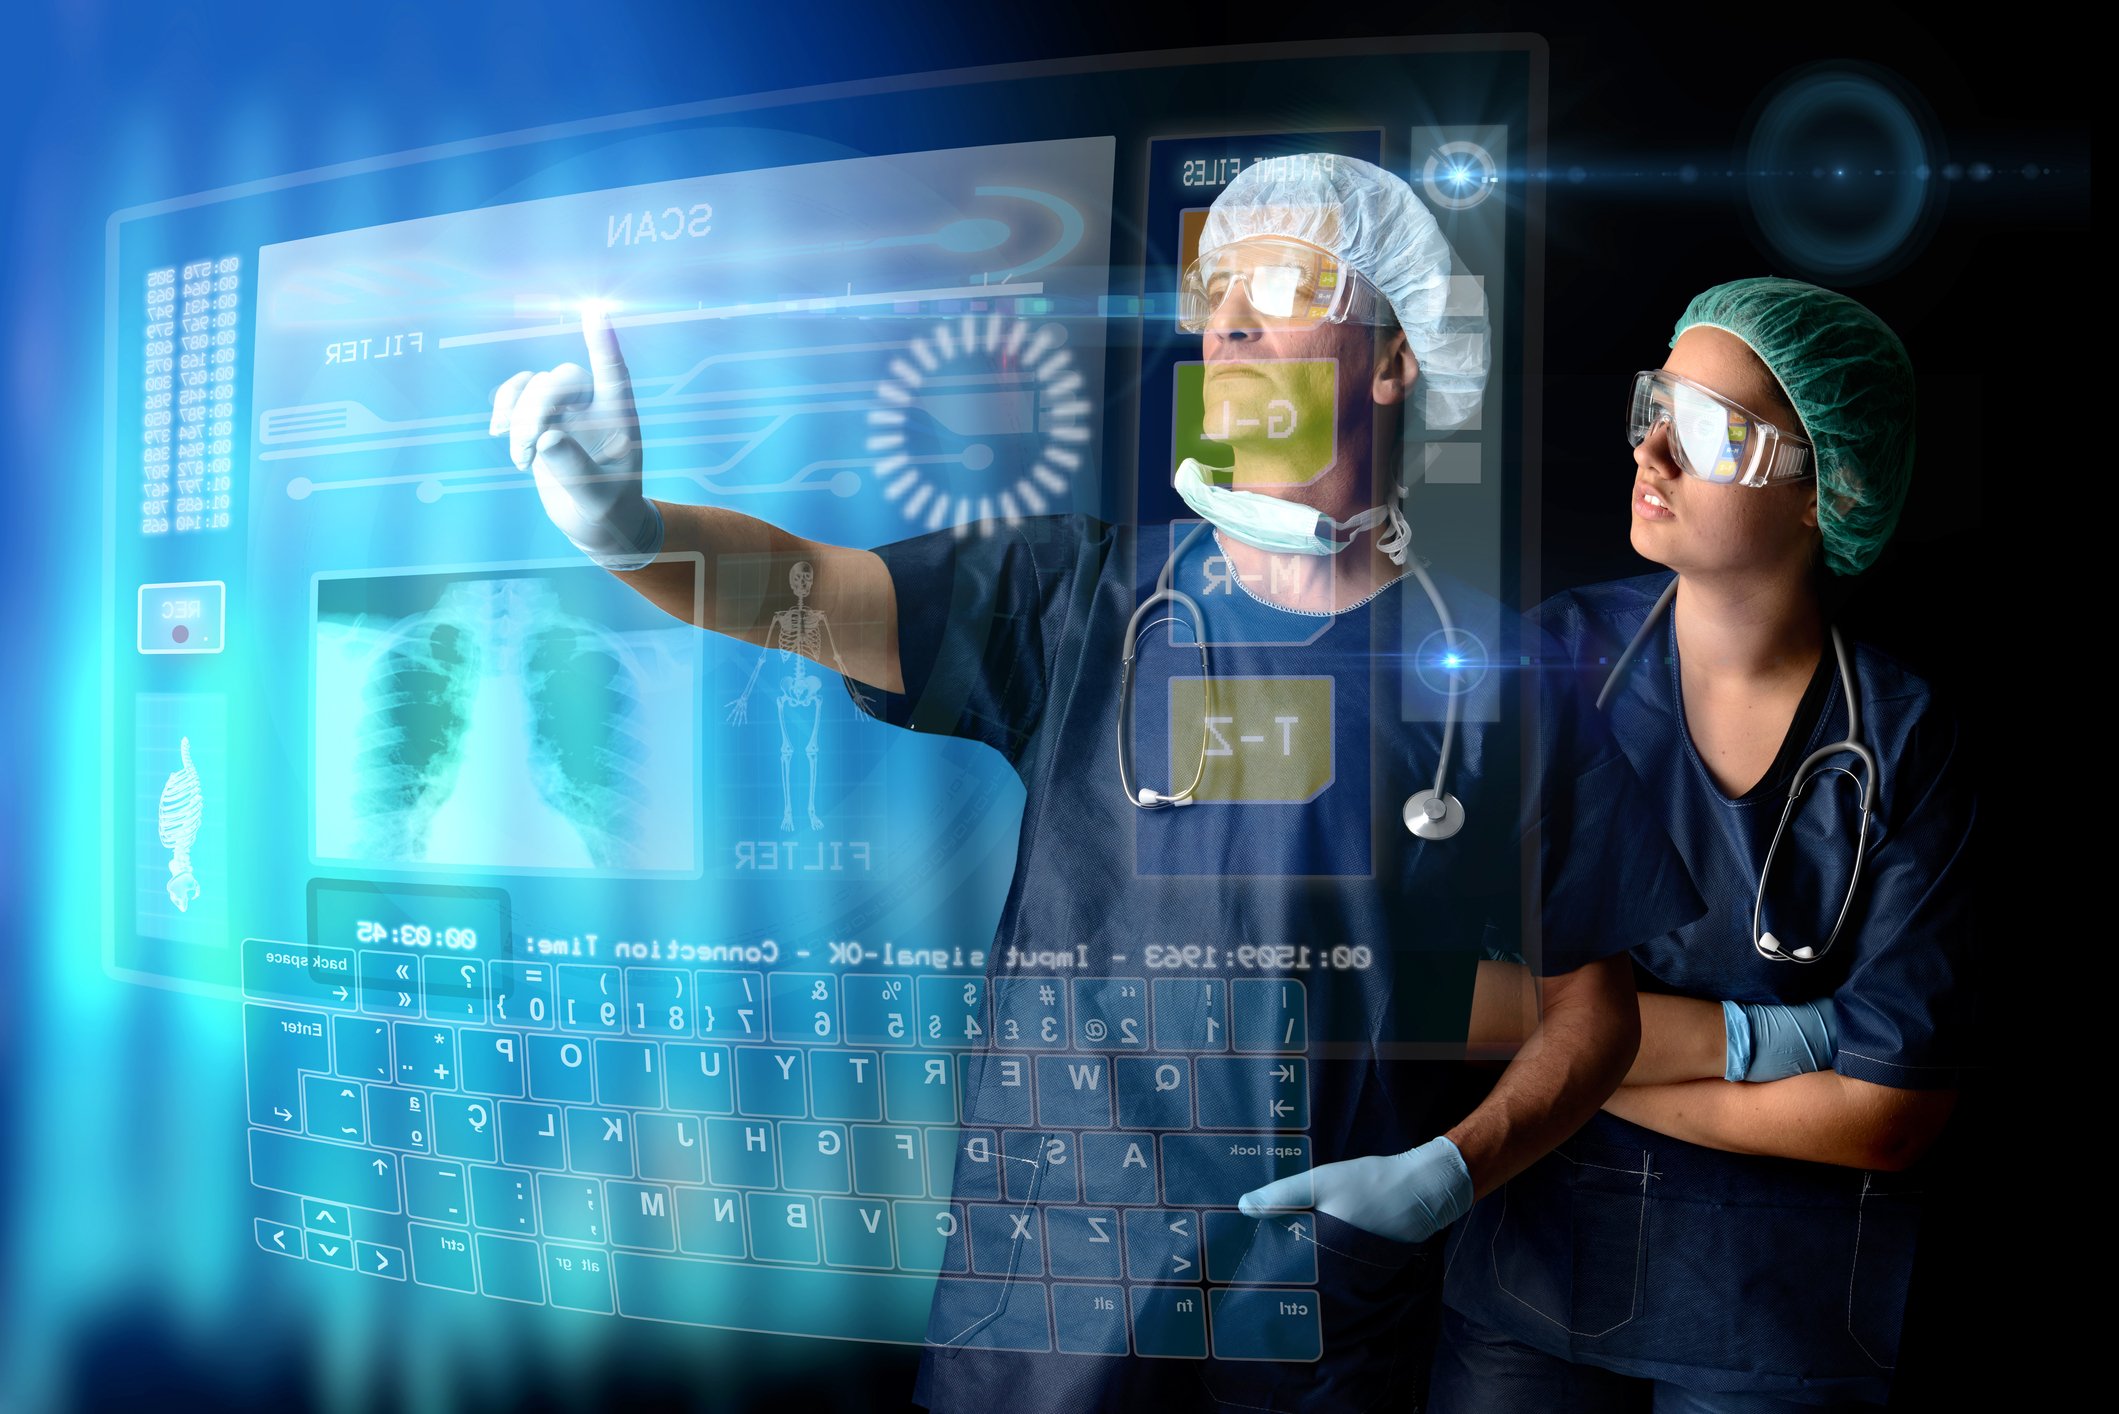 Look for an integrated system solution that meets your clinical needs from an imaging perspective